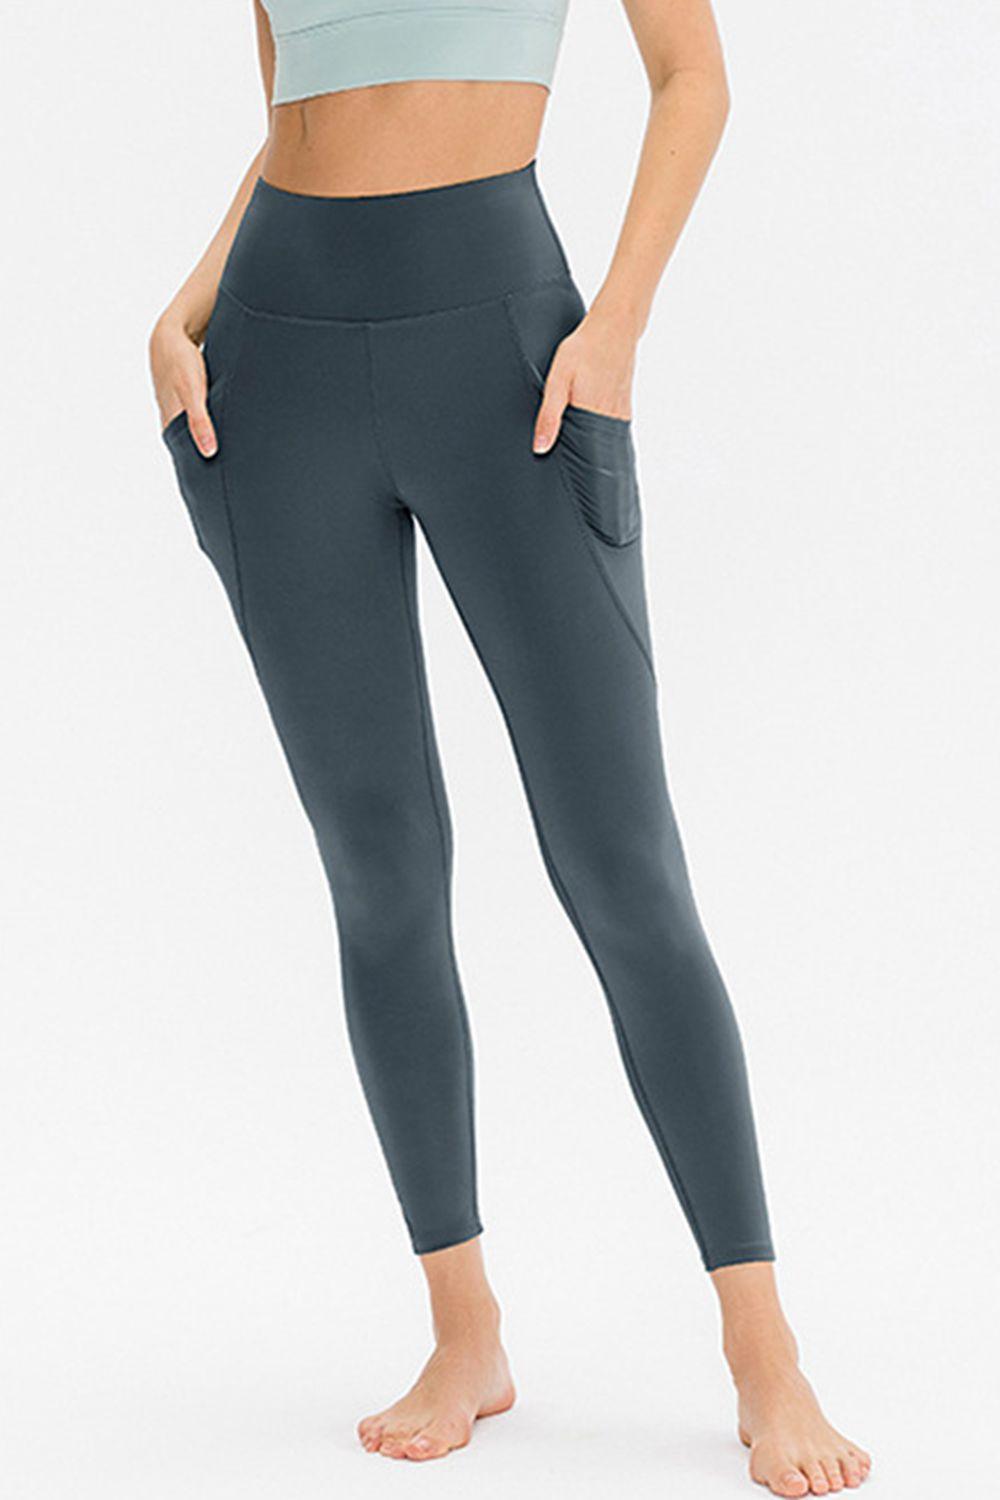 Slim Fit Long Active Leggings with Pockets - Lab Fashion, Home & Health